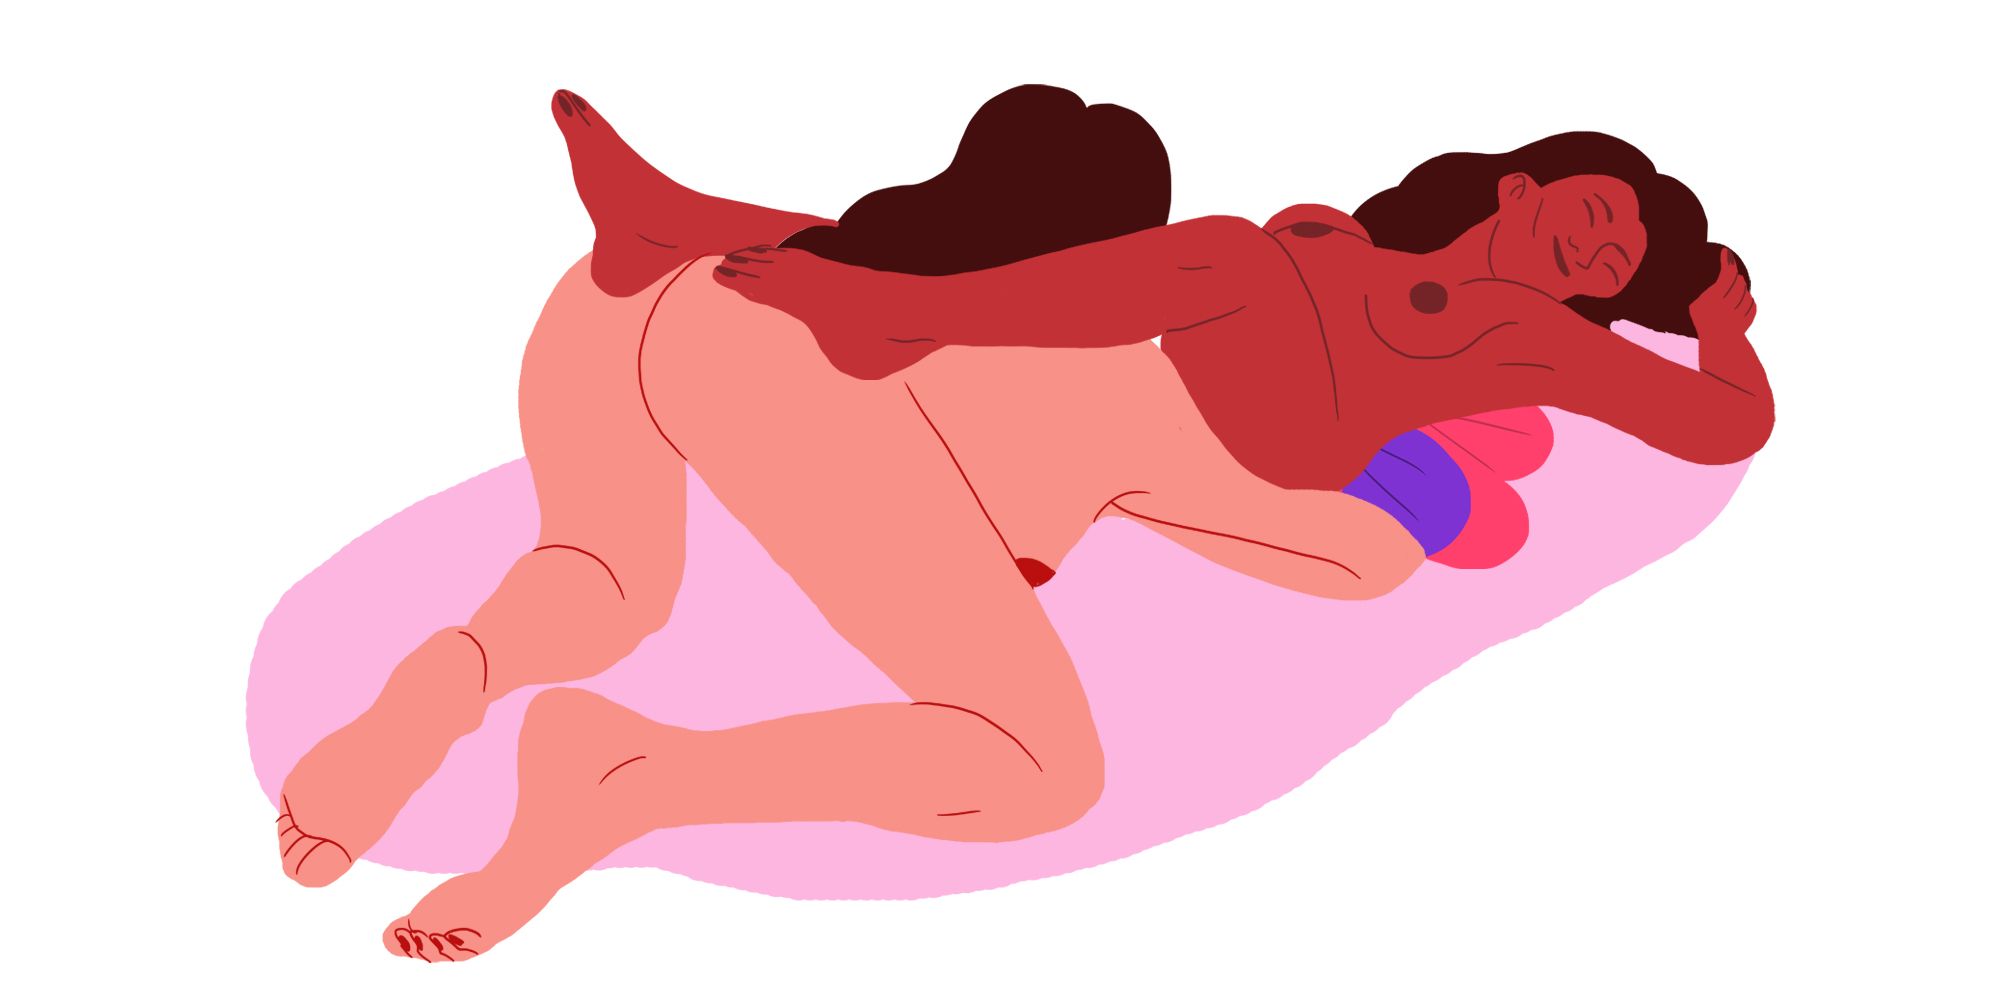 Hot Lesbian Sex Positions - What Is Scissoring - All About Lesbian Scissoring